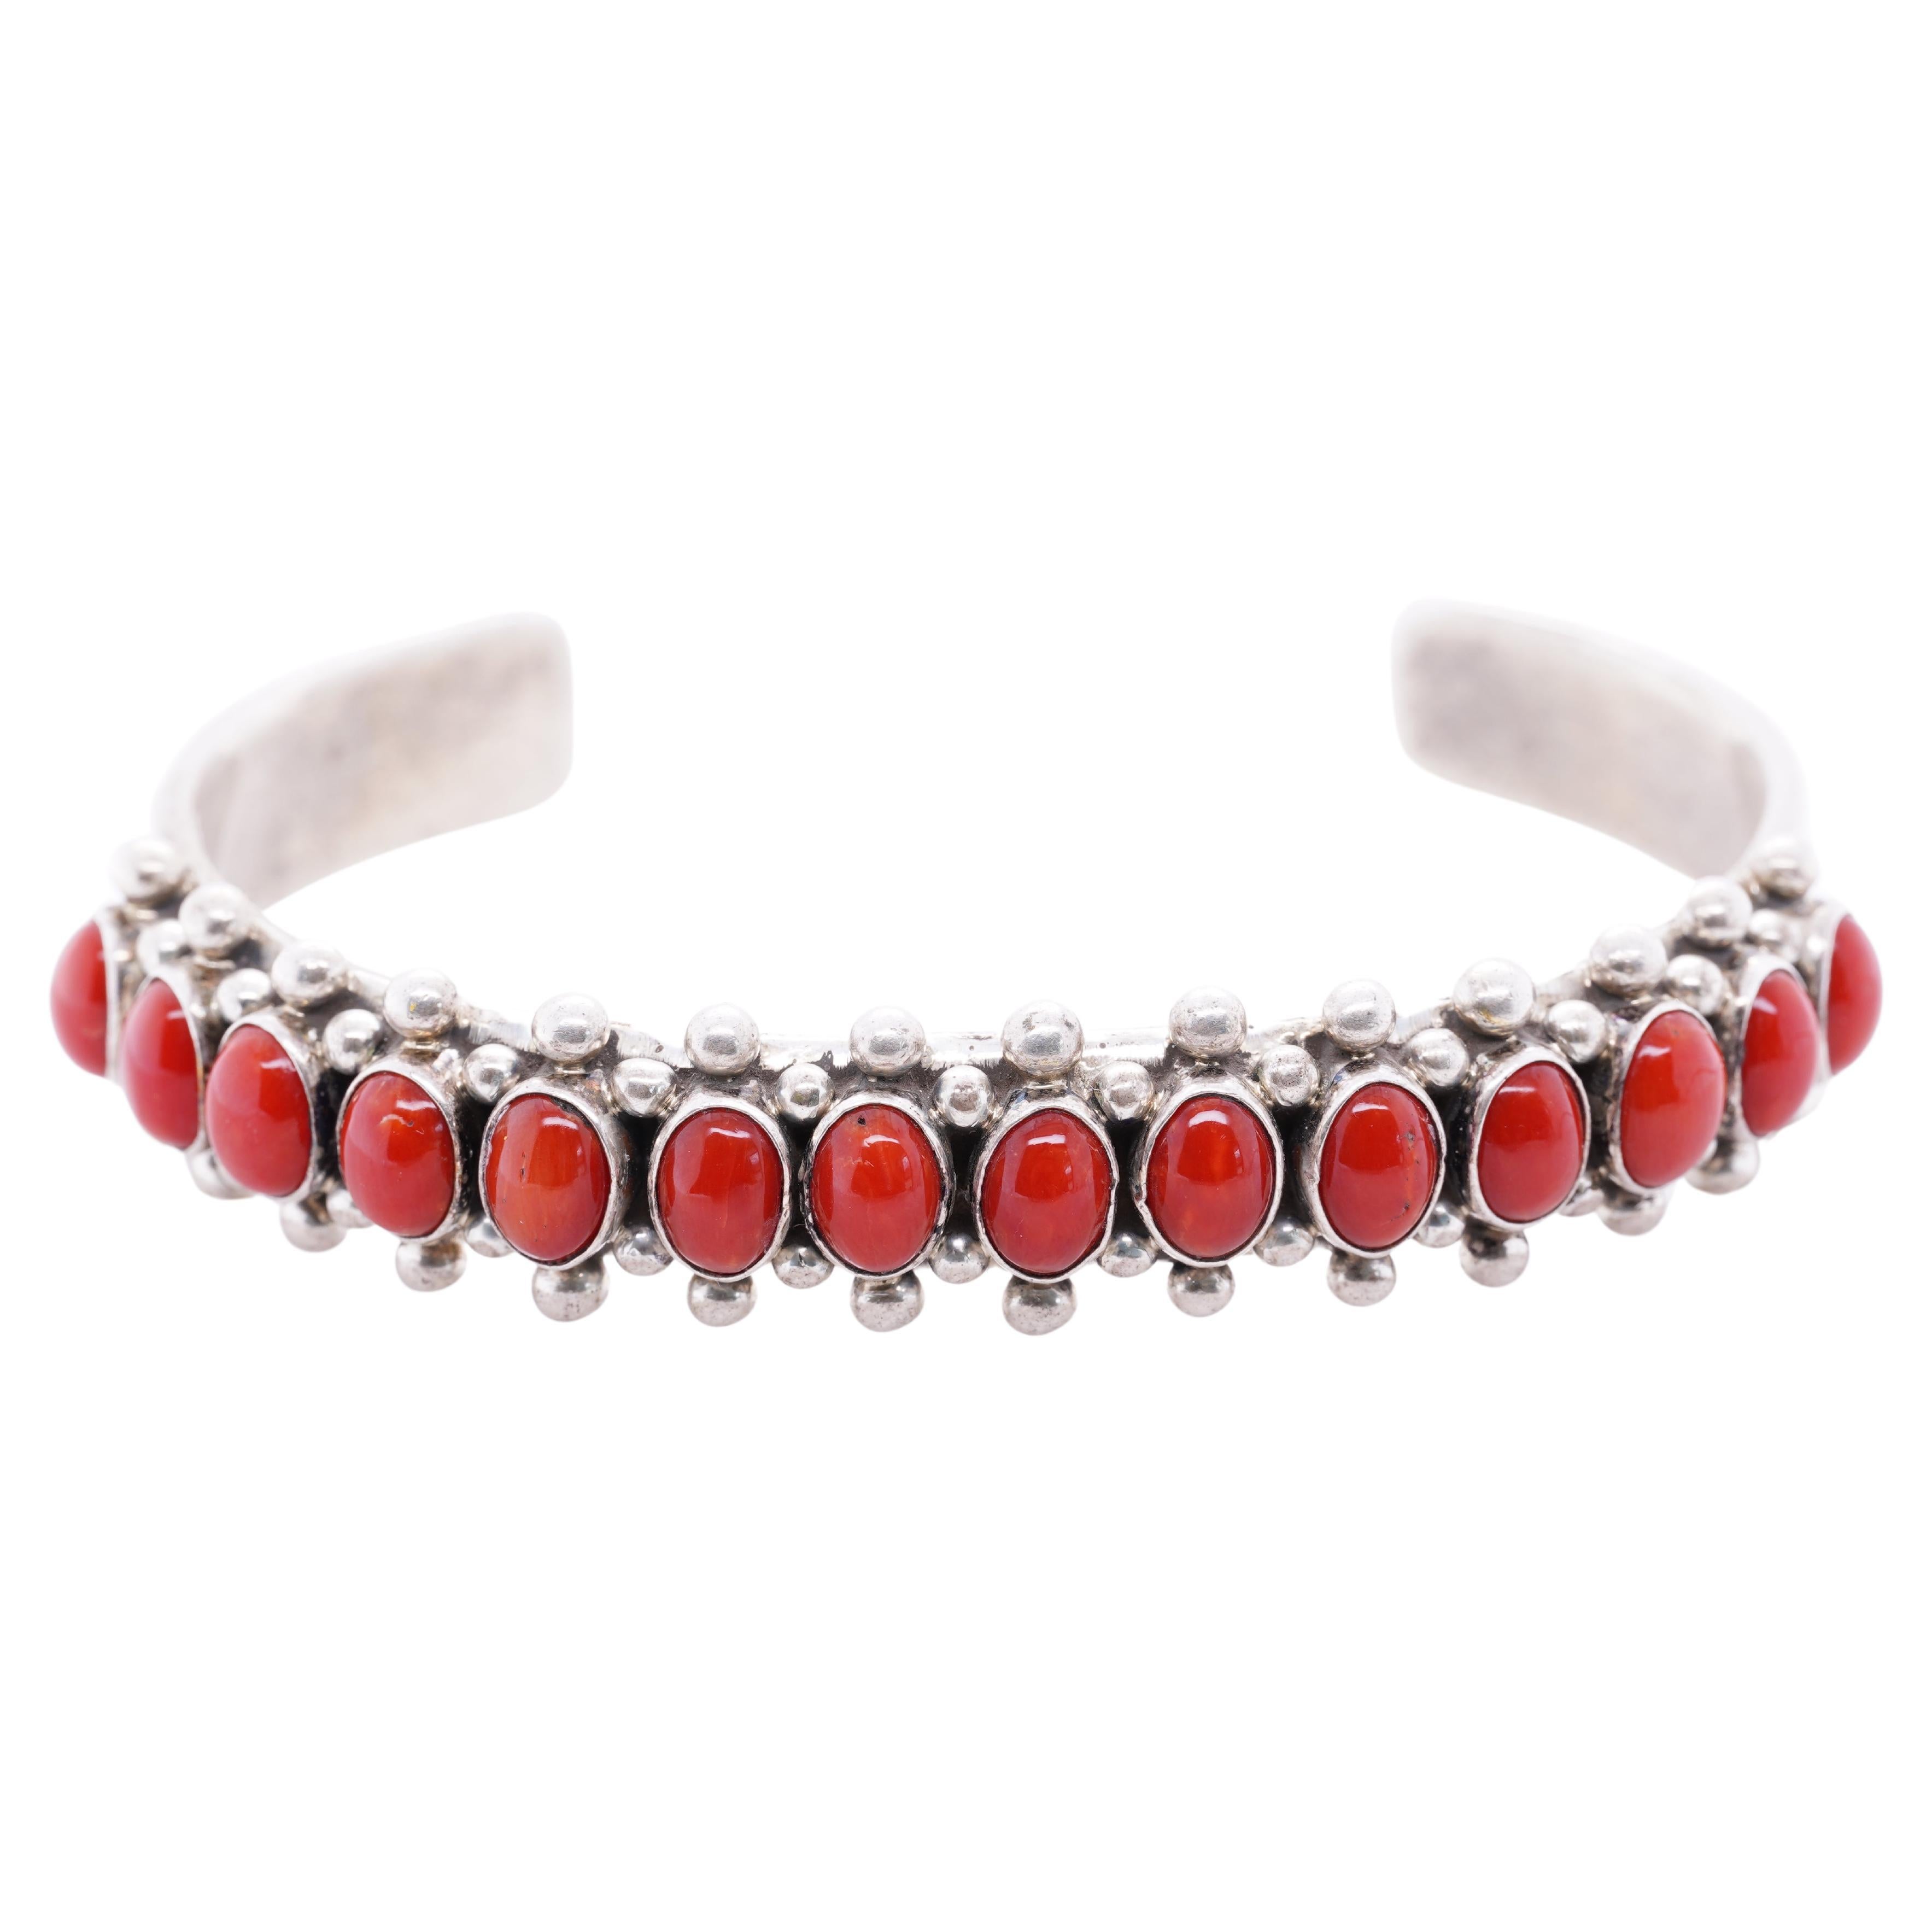 Paul Livingston Navajo Bright Red Oval Coral Sterling Silver Heavy Cuff Bracelet